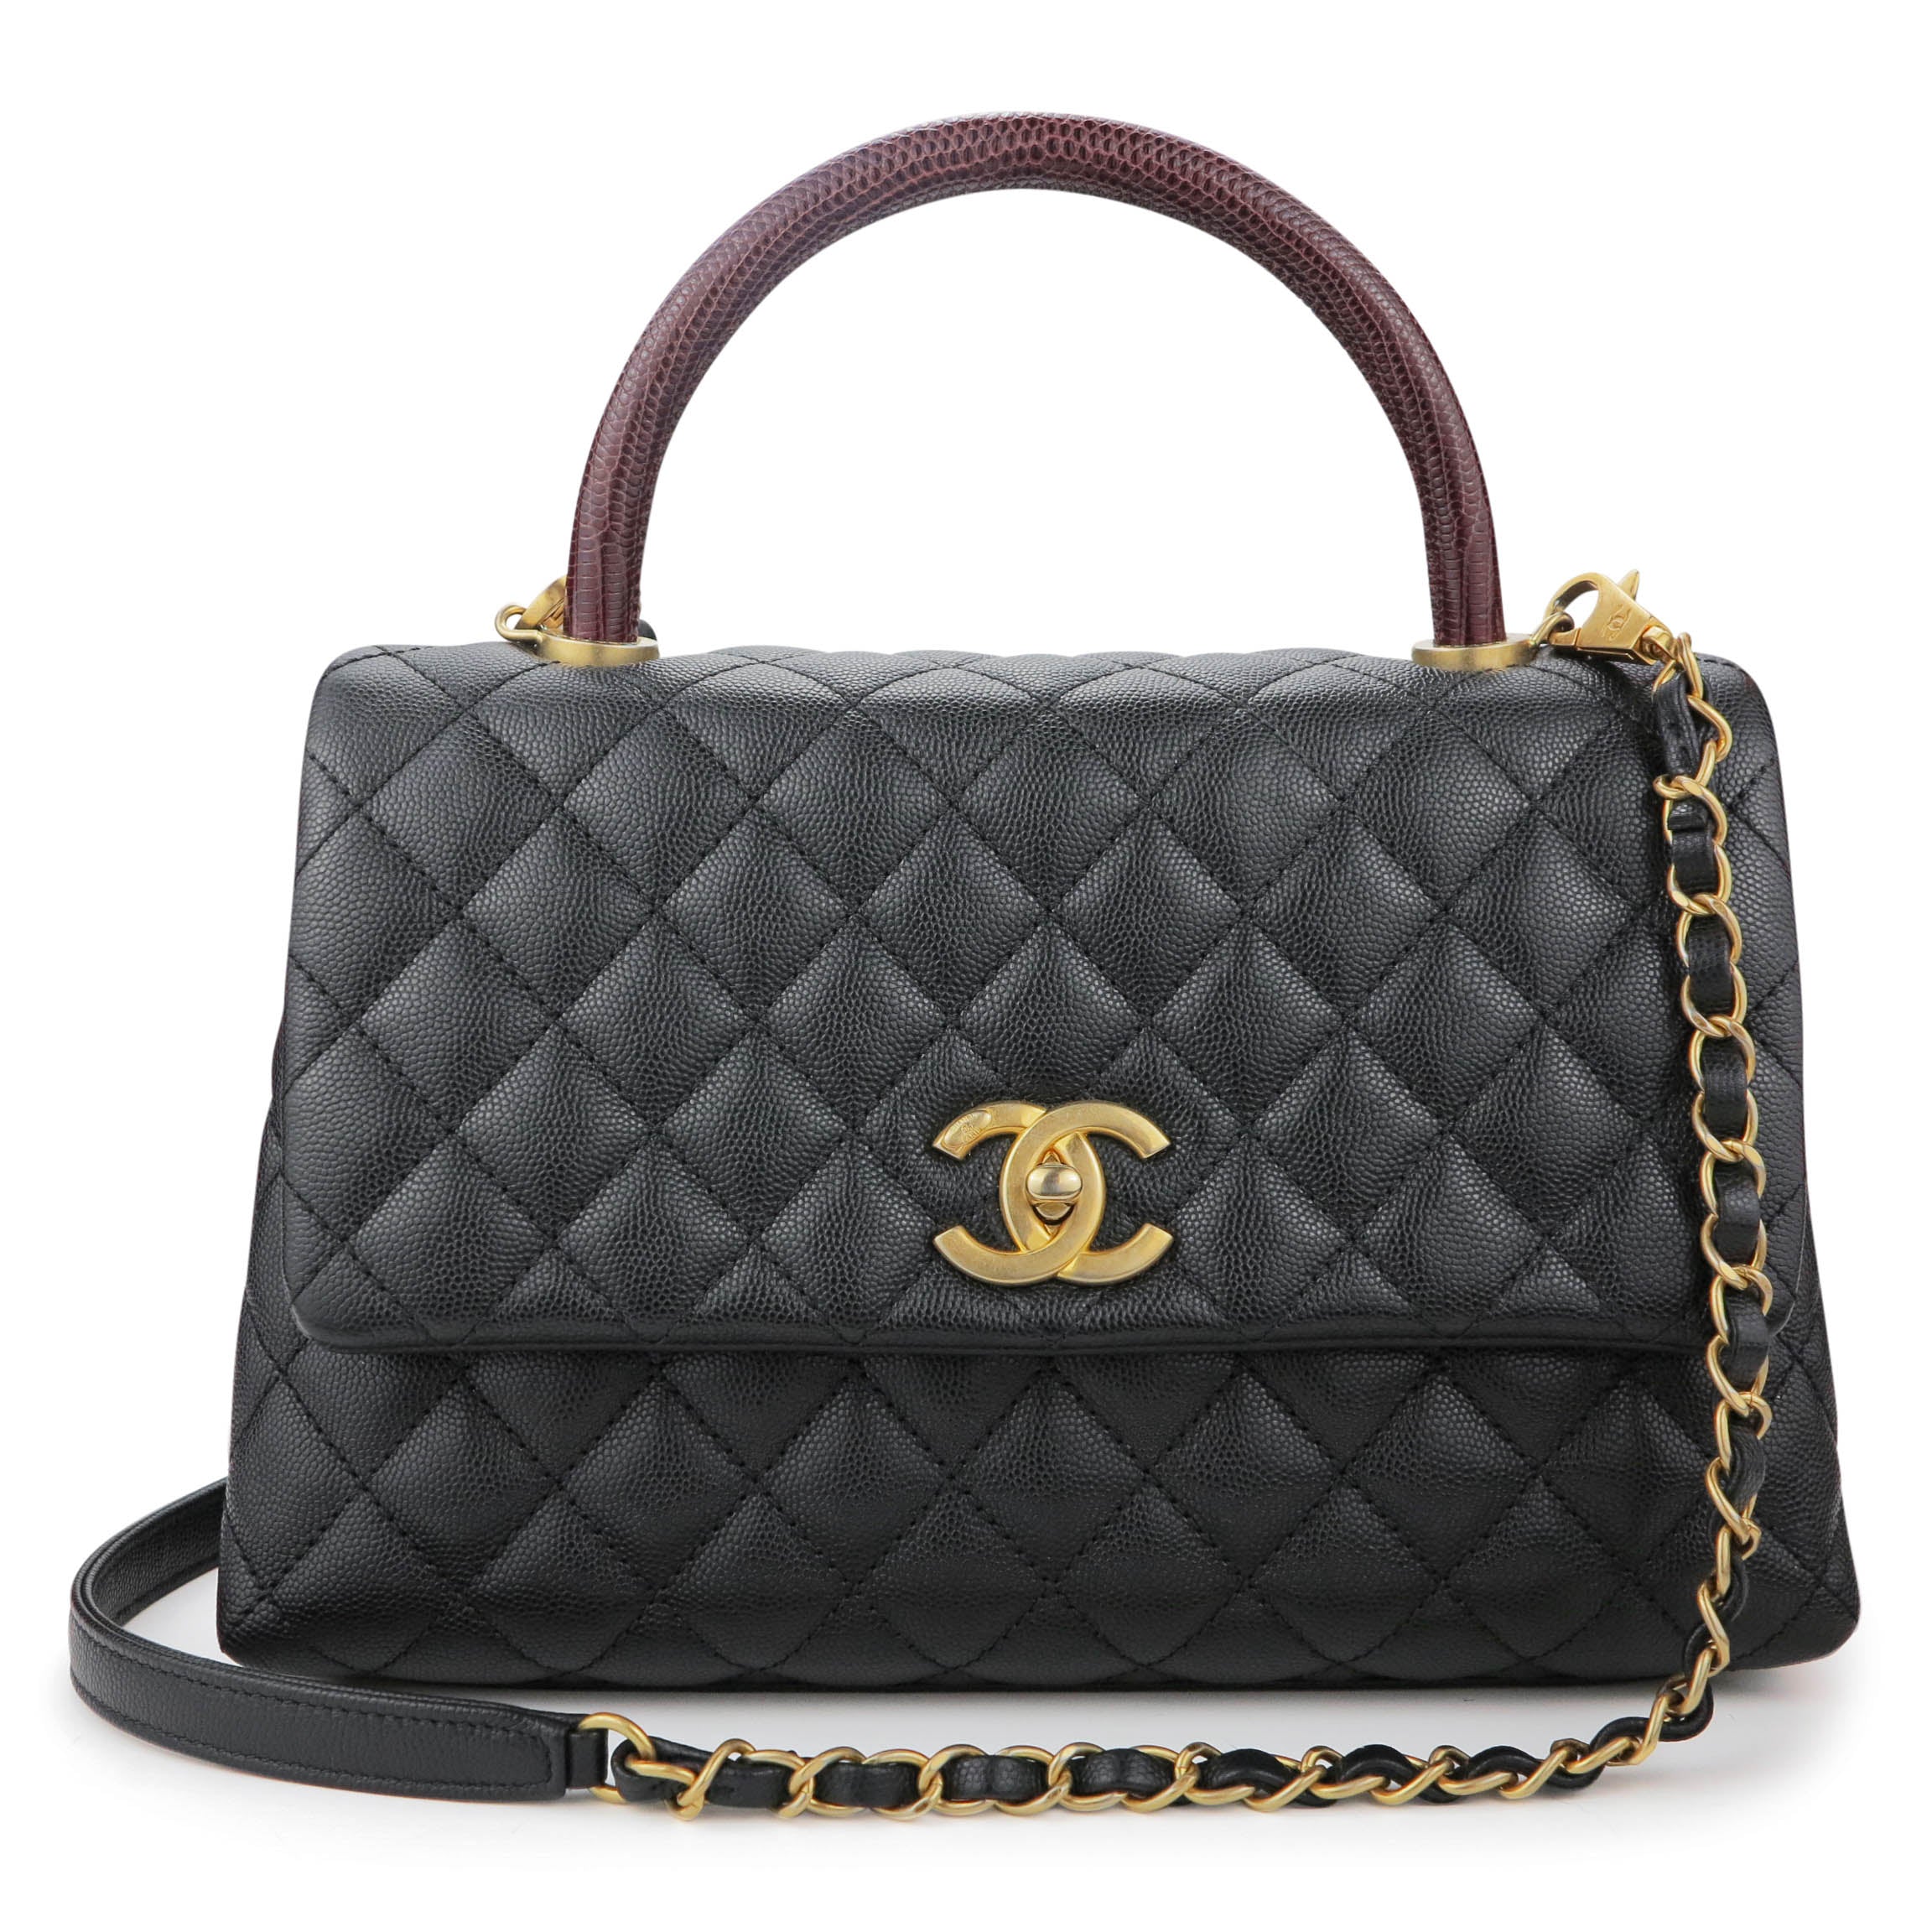 Chanel Coco Handle Small Flap Bag Black/Burgundy with Lizard Top Handle  A92990 Original Quality 7147